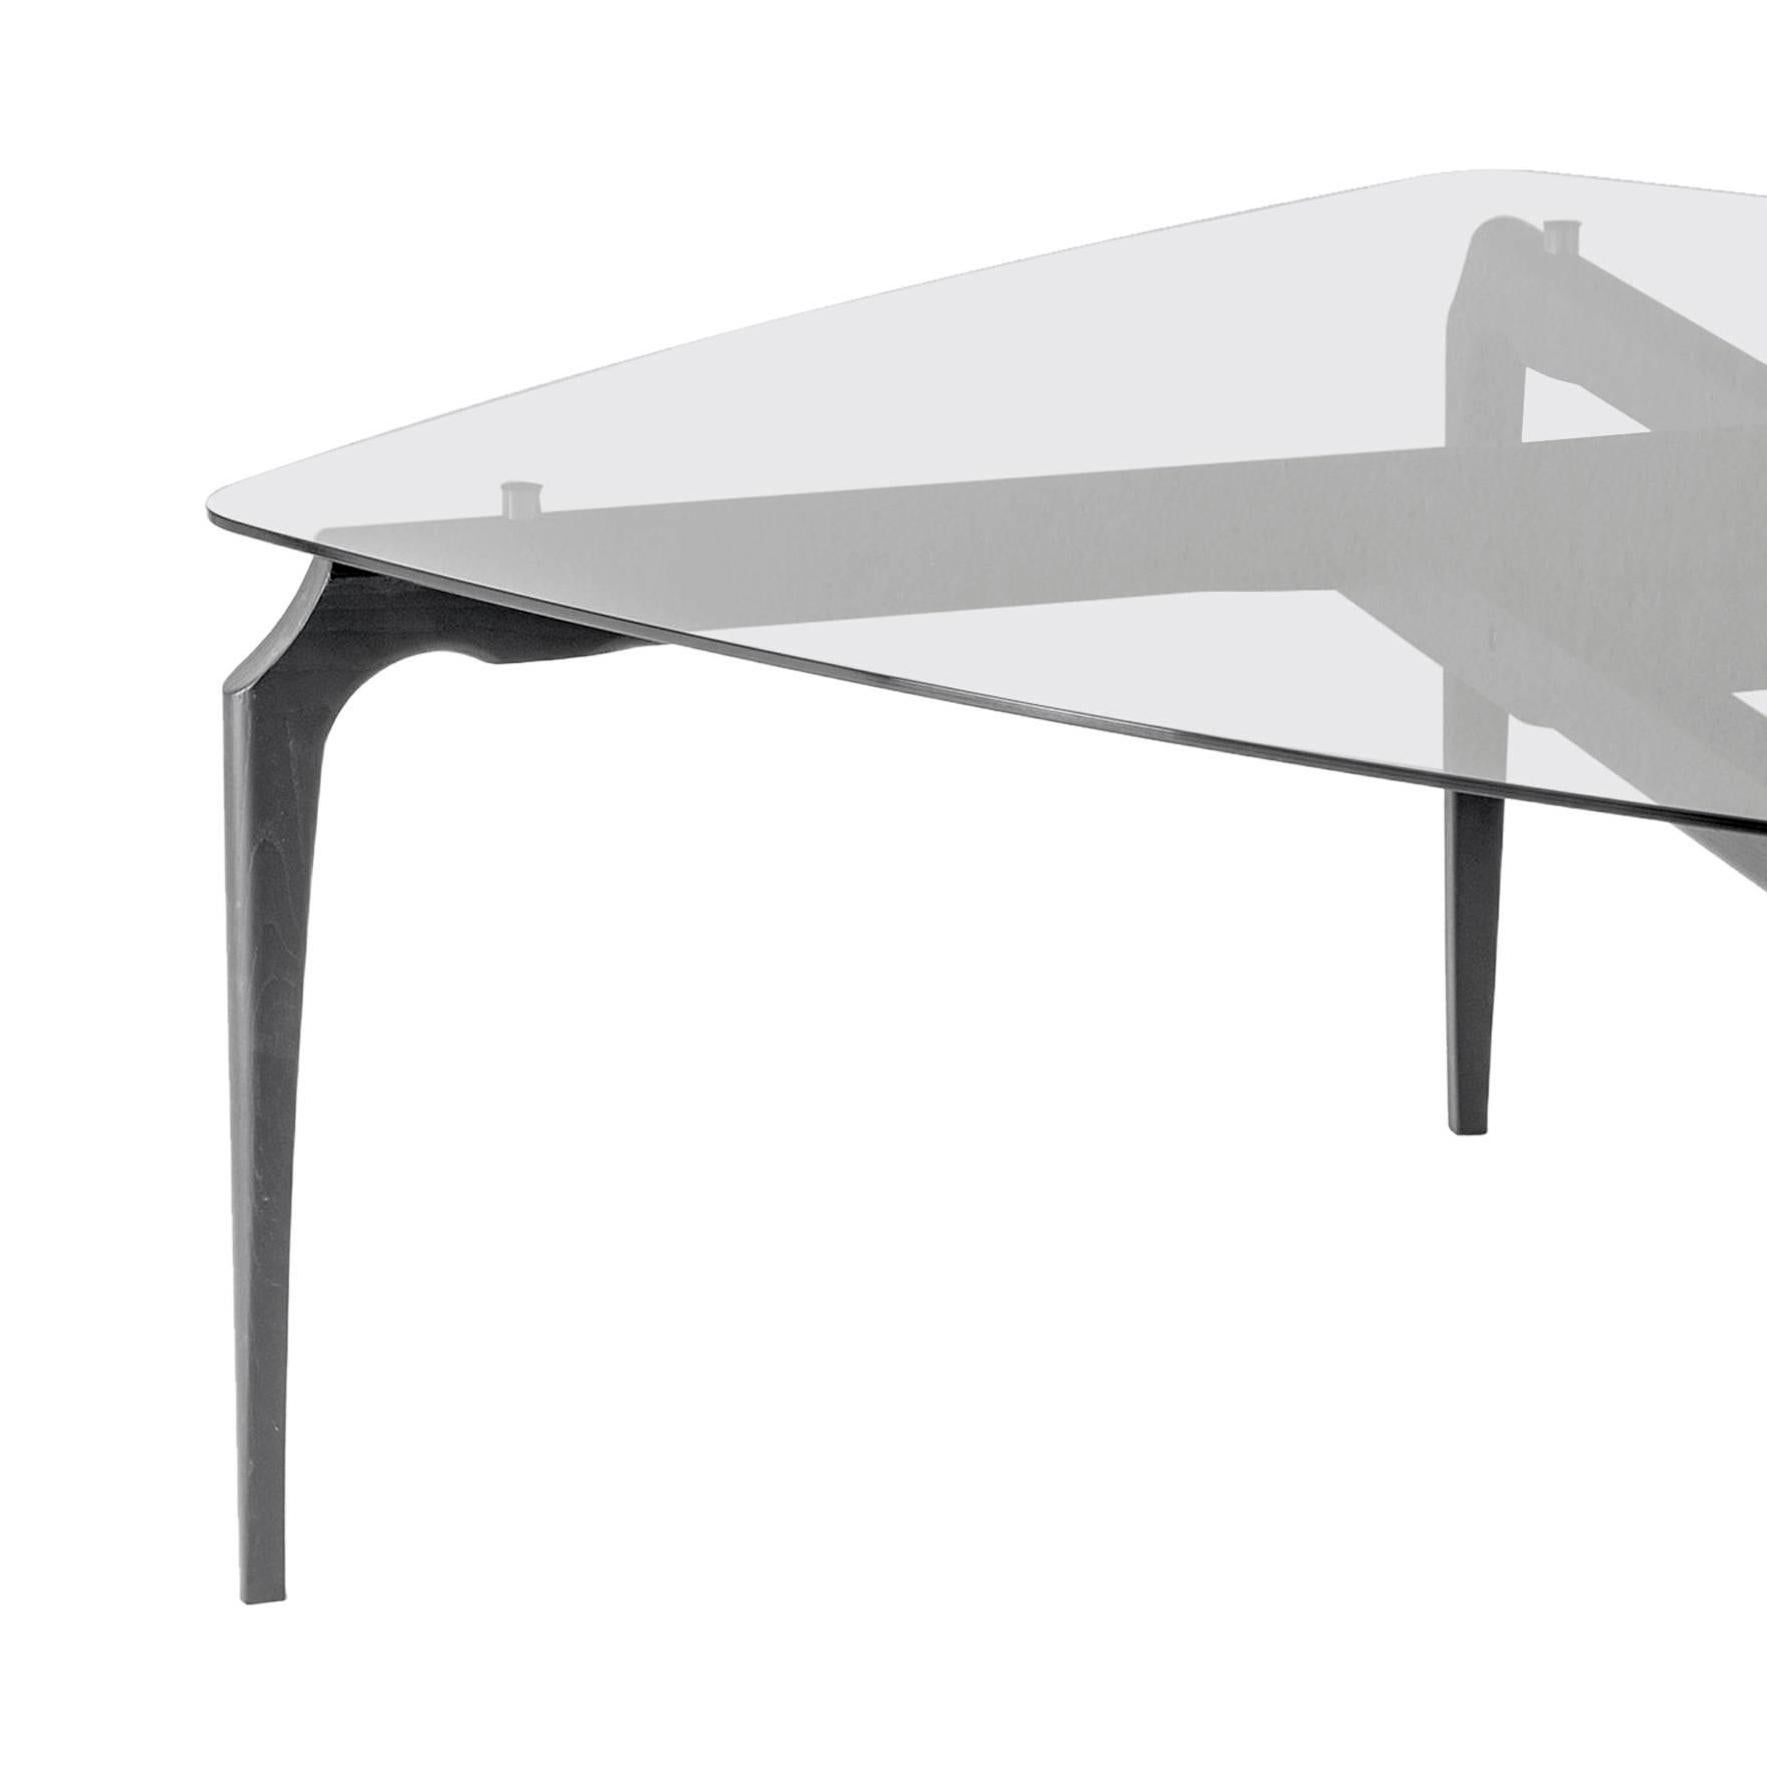 Gaulino table designed by Oscar Tusquets manufactured by BD Barcelona Design, circa 2010.

Oscar Tusquets, architect, artist and writer has designed nearly everything during hislong career. In particular many chairs, some of them very admired but